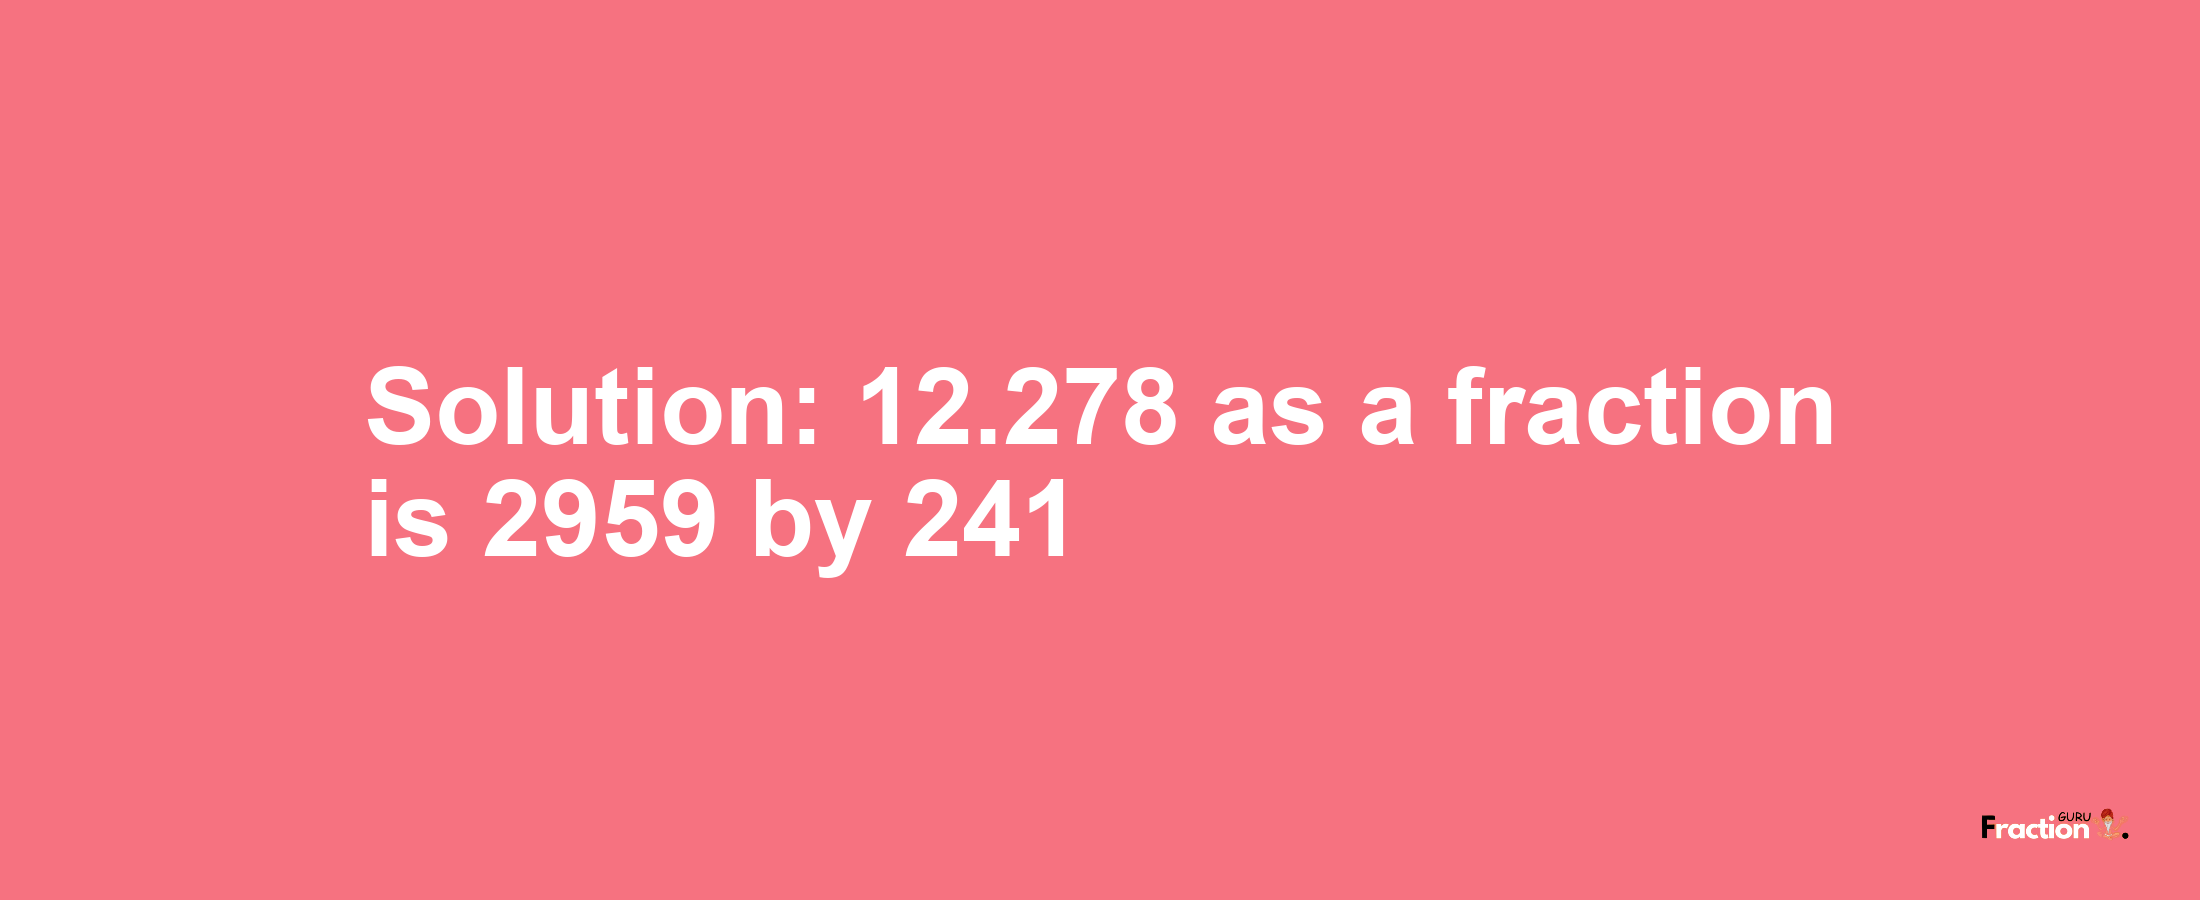 Solution:12.278 as a fraction is 2959/241